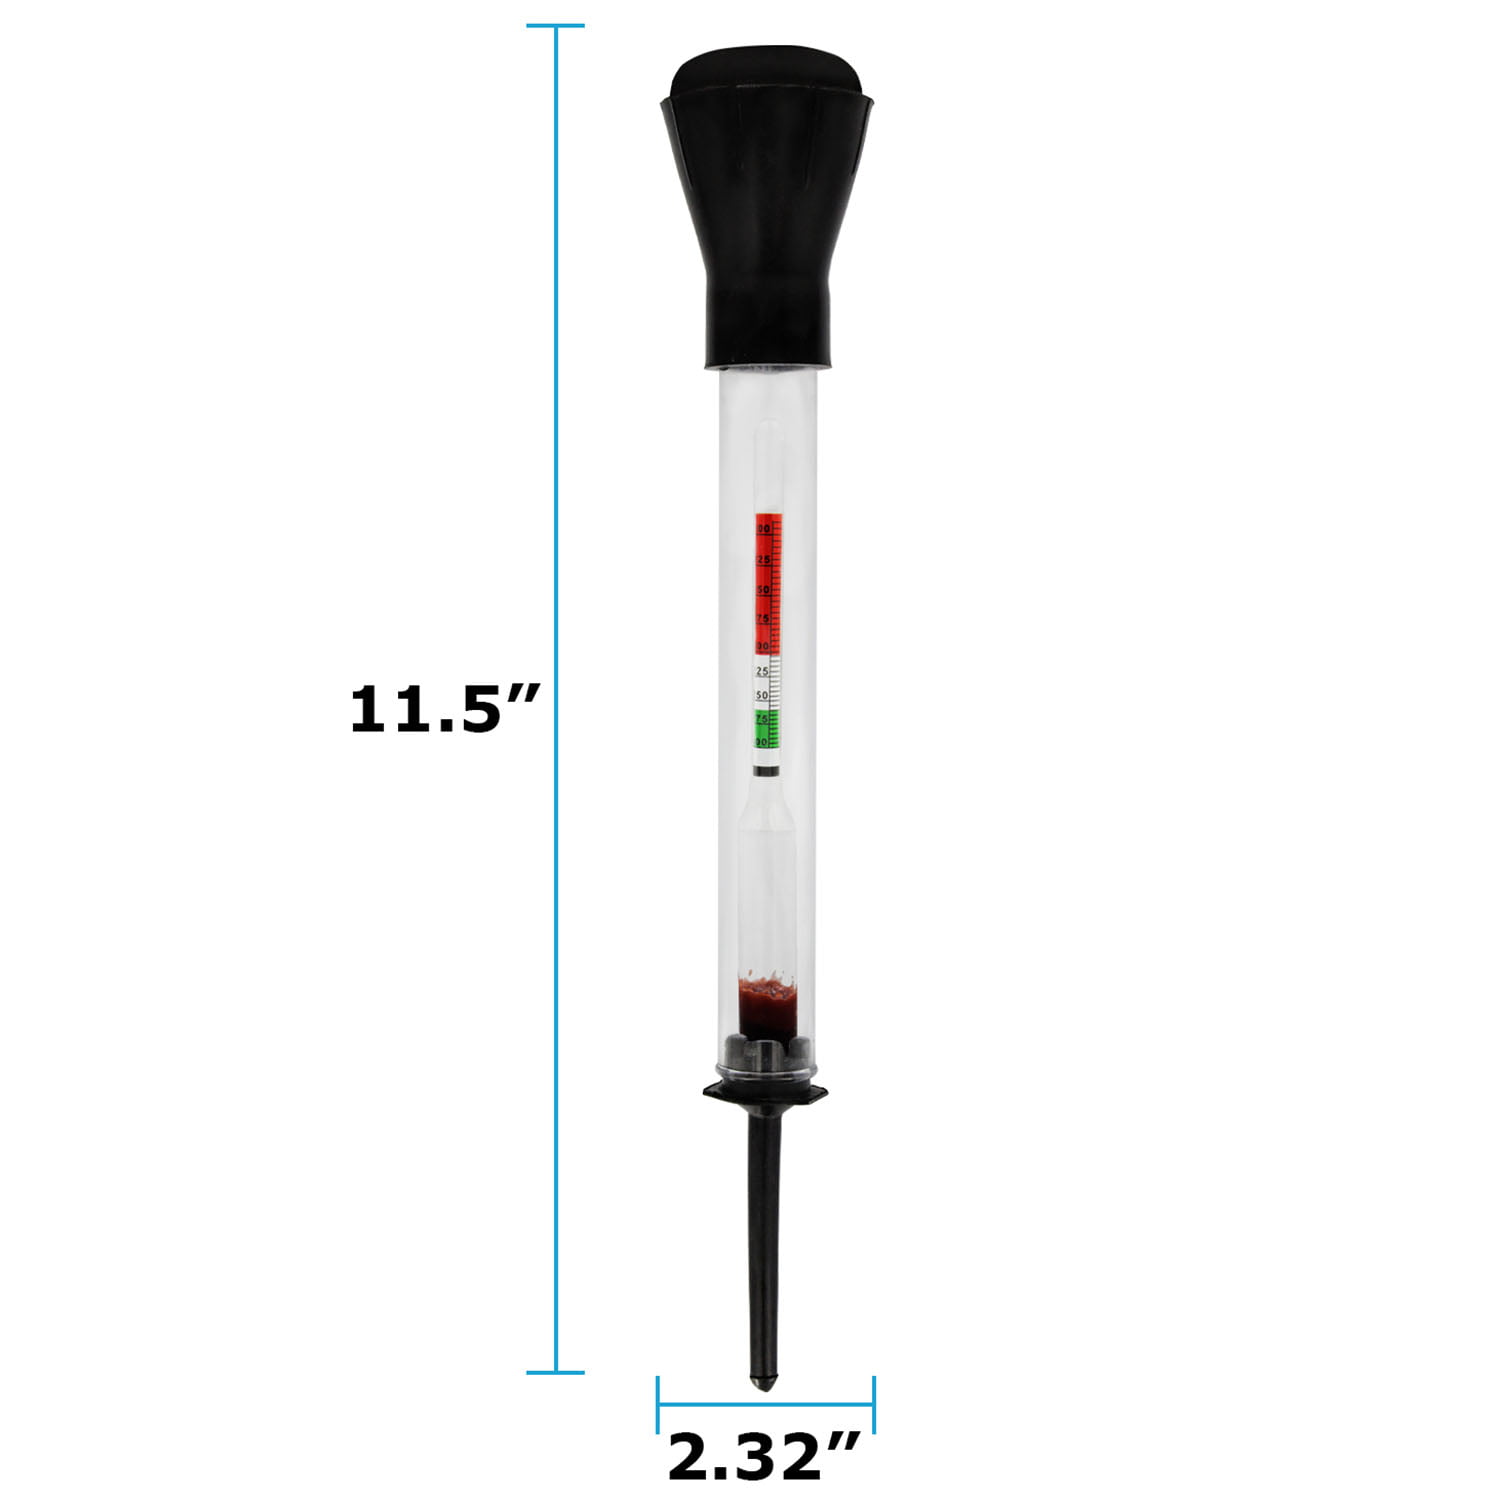 Black Cart Deep Cycle Battery Rapid Hydrometer Tester Fast Detection Tool 